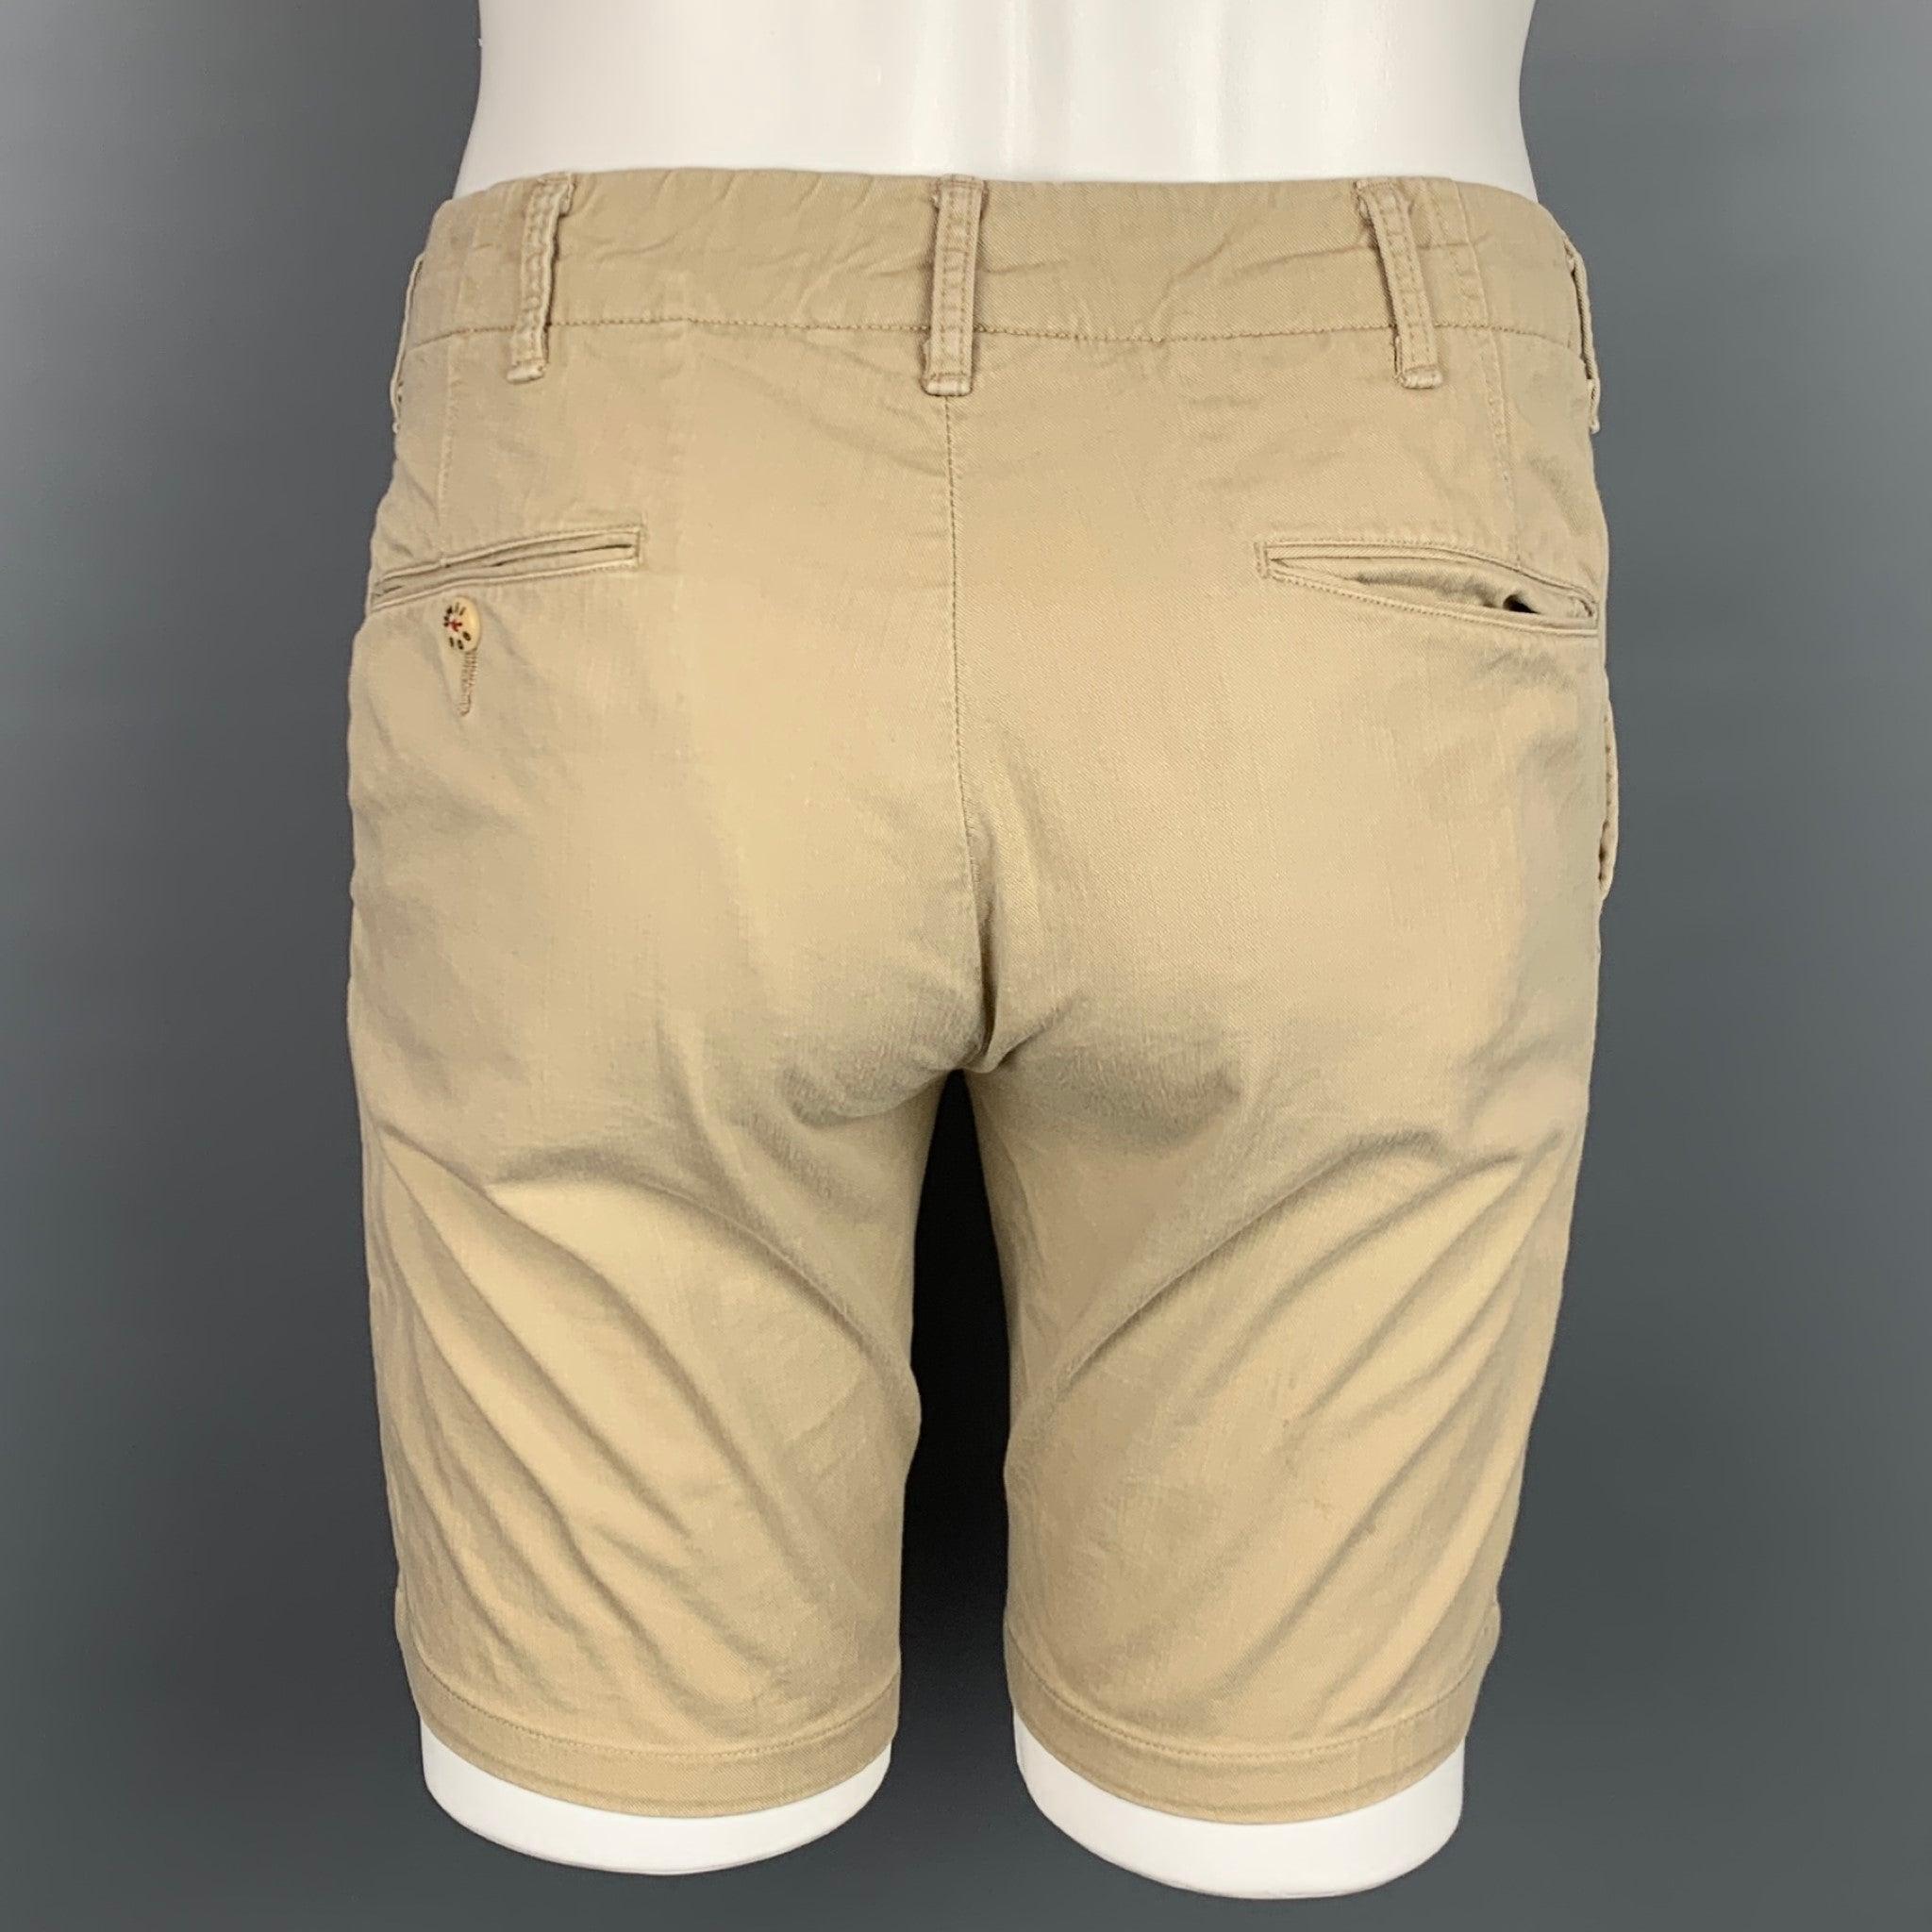 45RPM shorts comes in a khaki cotton featuring a narrow leg, slit pockets, and a zip fly closure. Fabric made in Japan.Good
 Pre-Owned Condition. 
 

 Marked:  30 
 

 Measurements: 
  Waist: 30 inches Rise: 9 inches Inseam: 8 inches 
  
  
  
 Sui